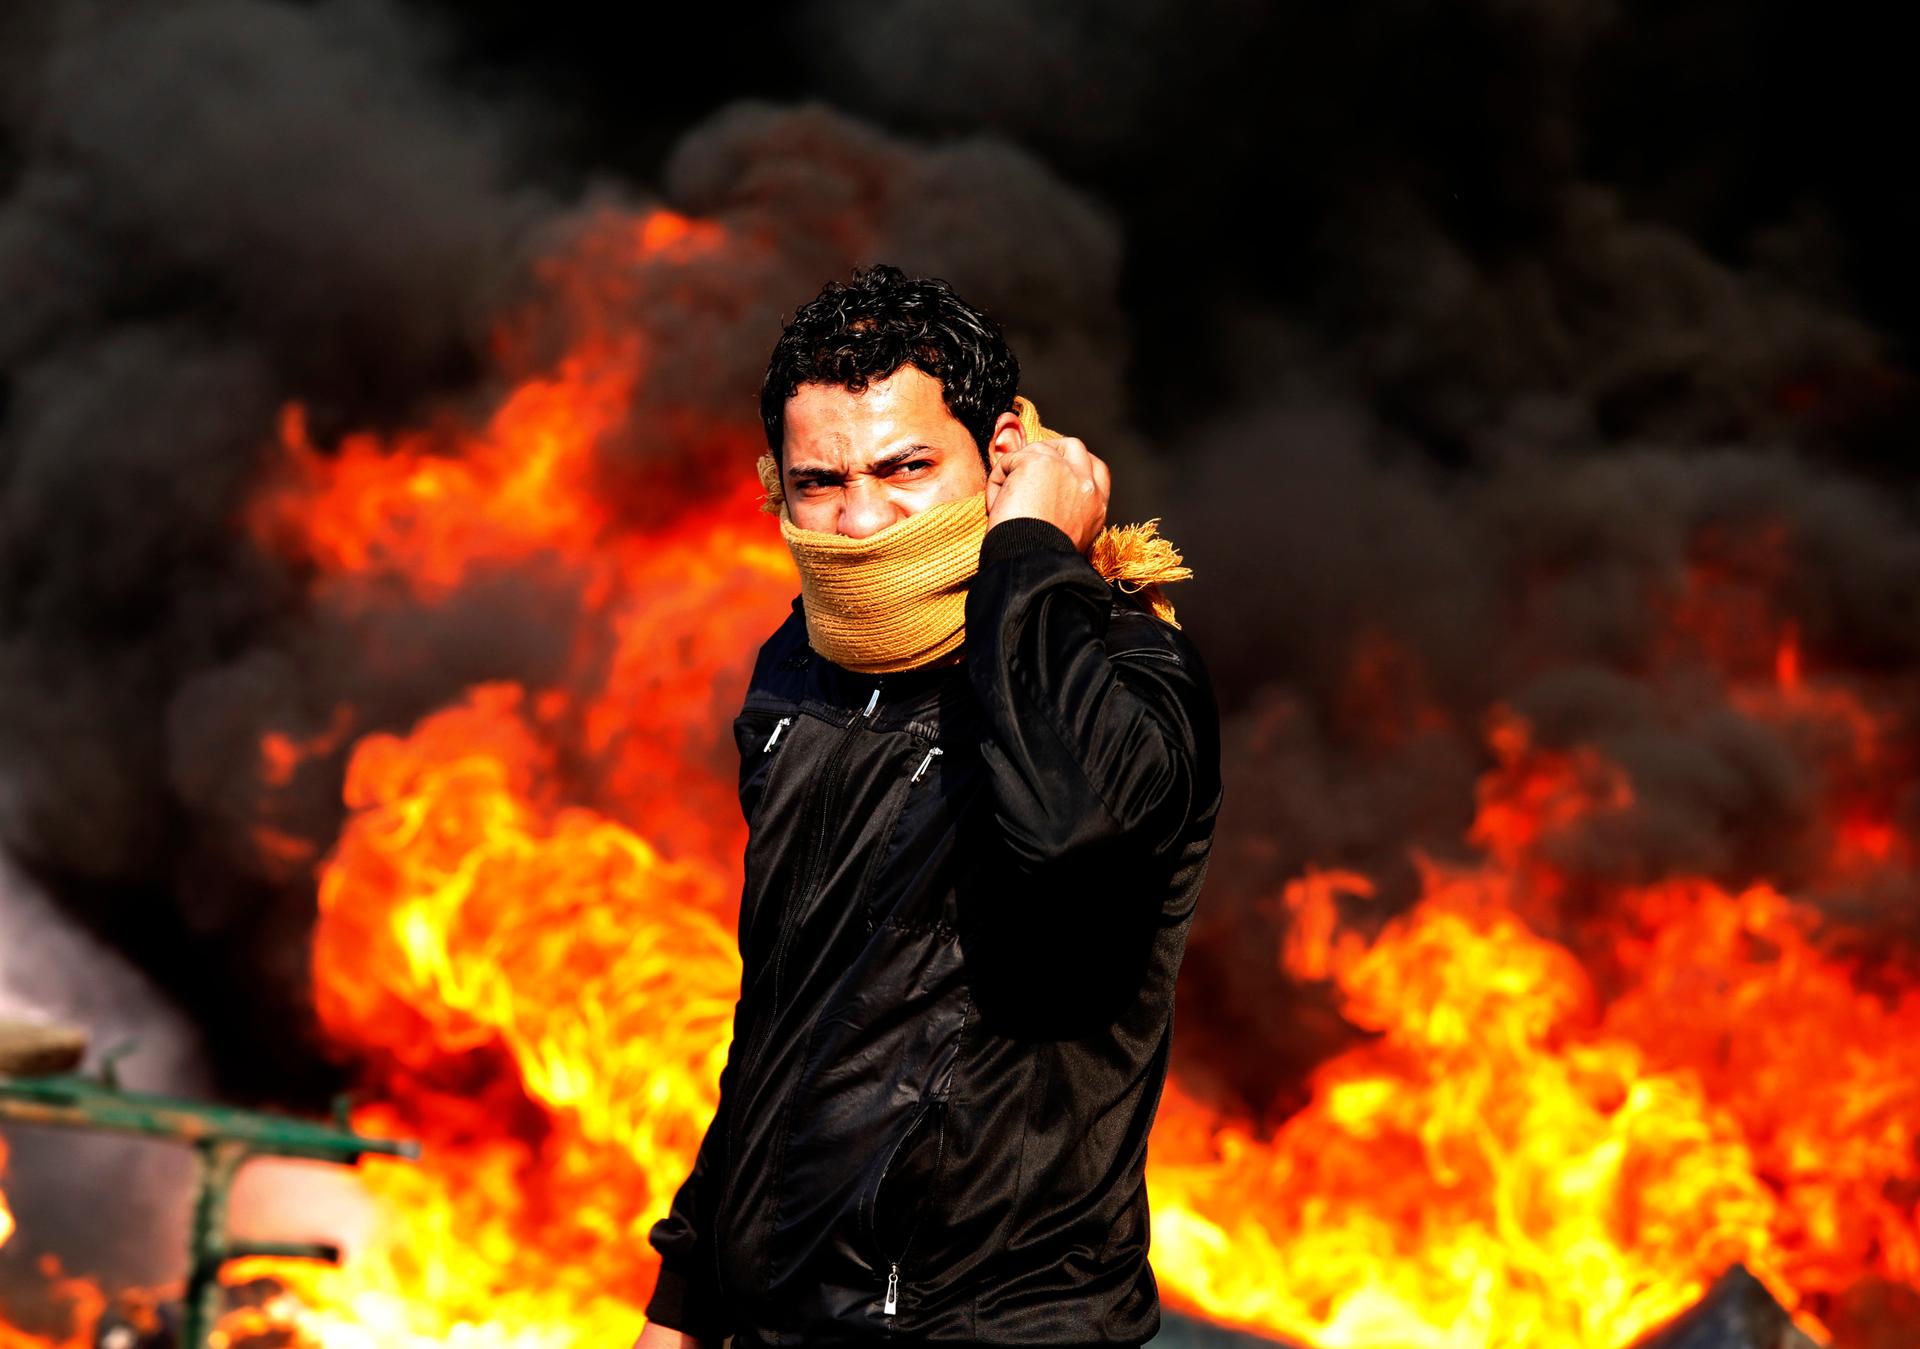 A protester stands in front of a burning barricade during a demonstration in Cairo January 28, 2011.